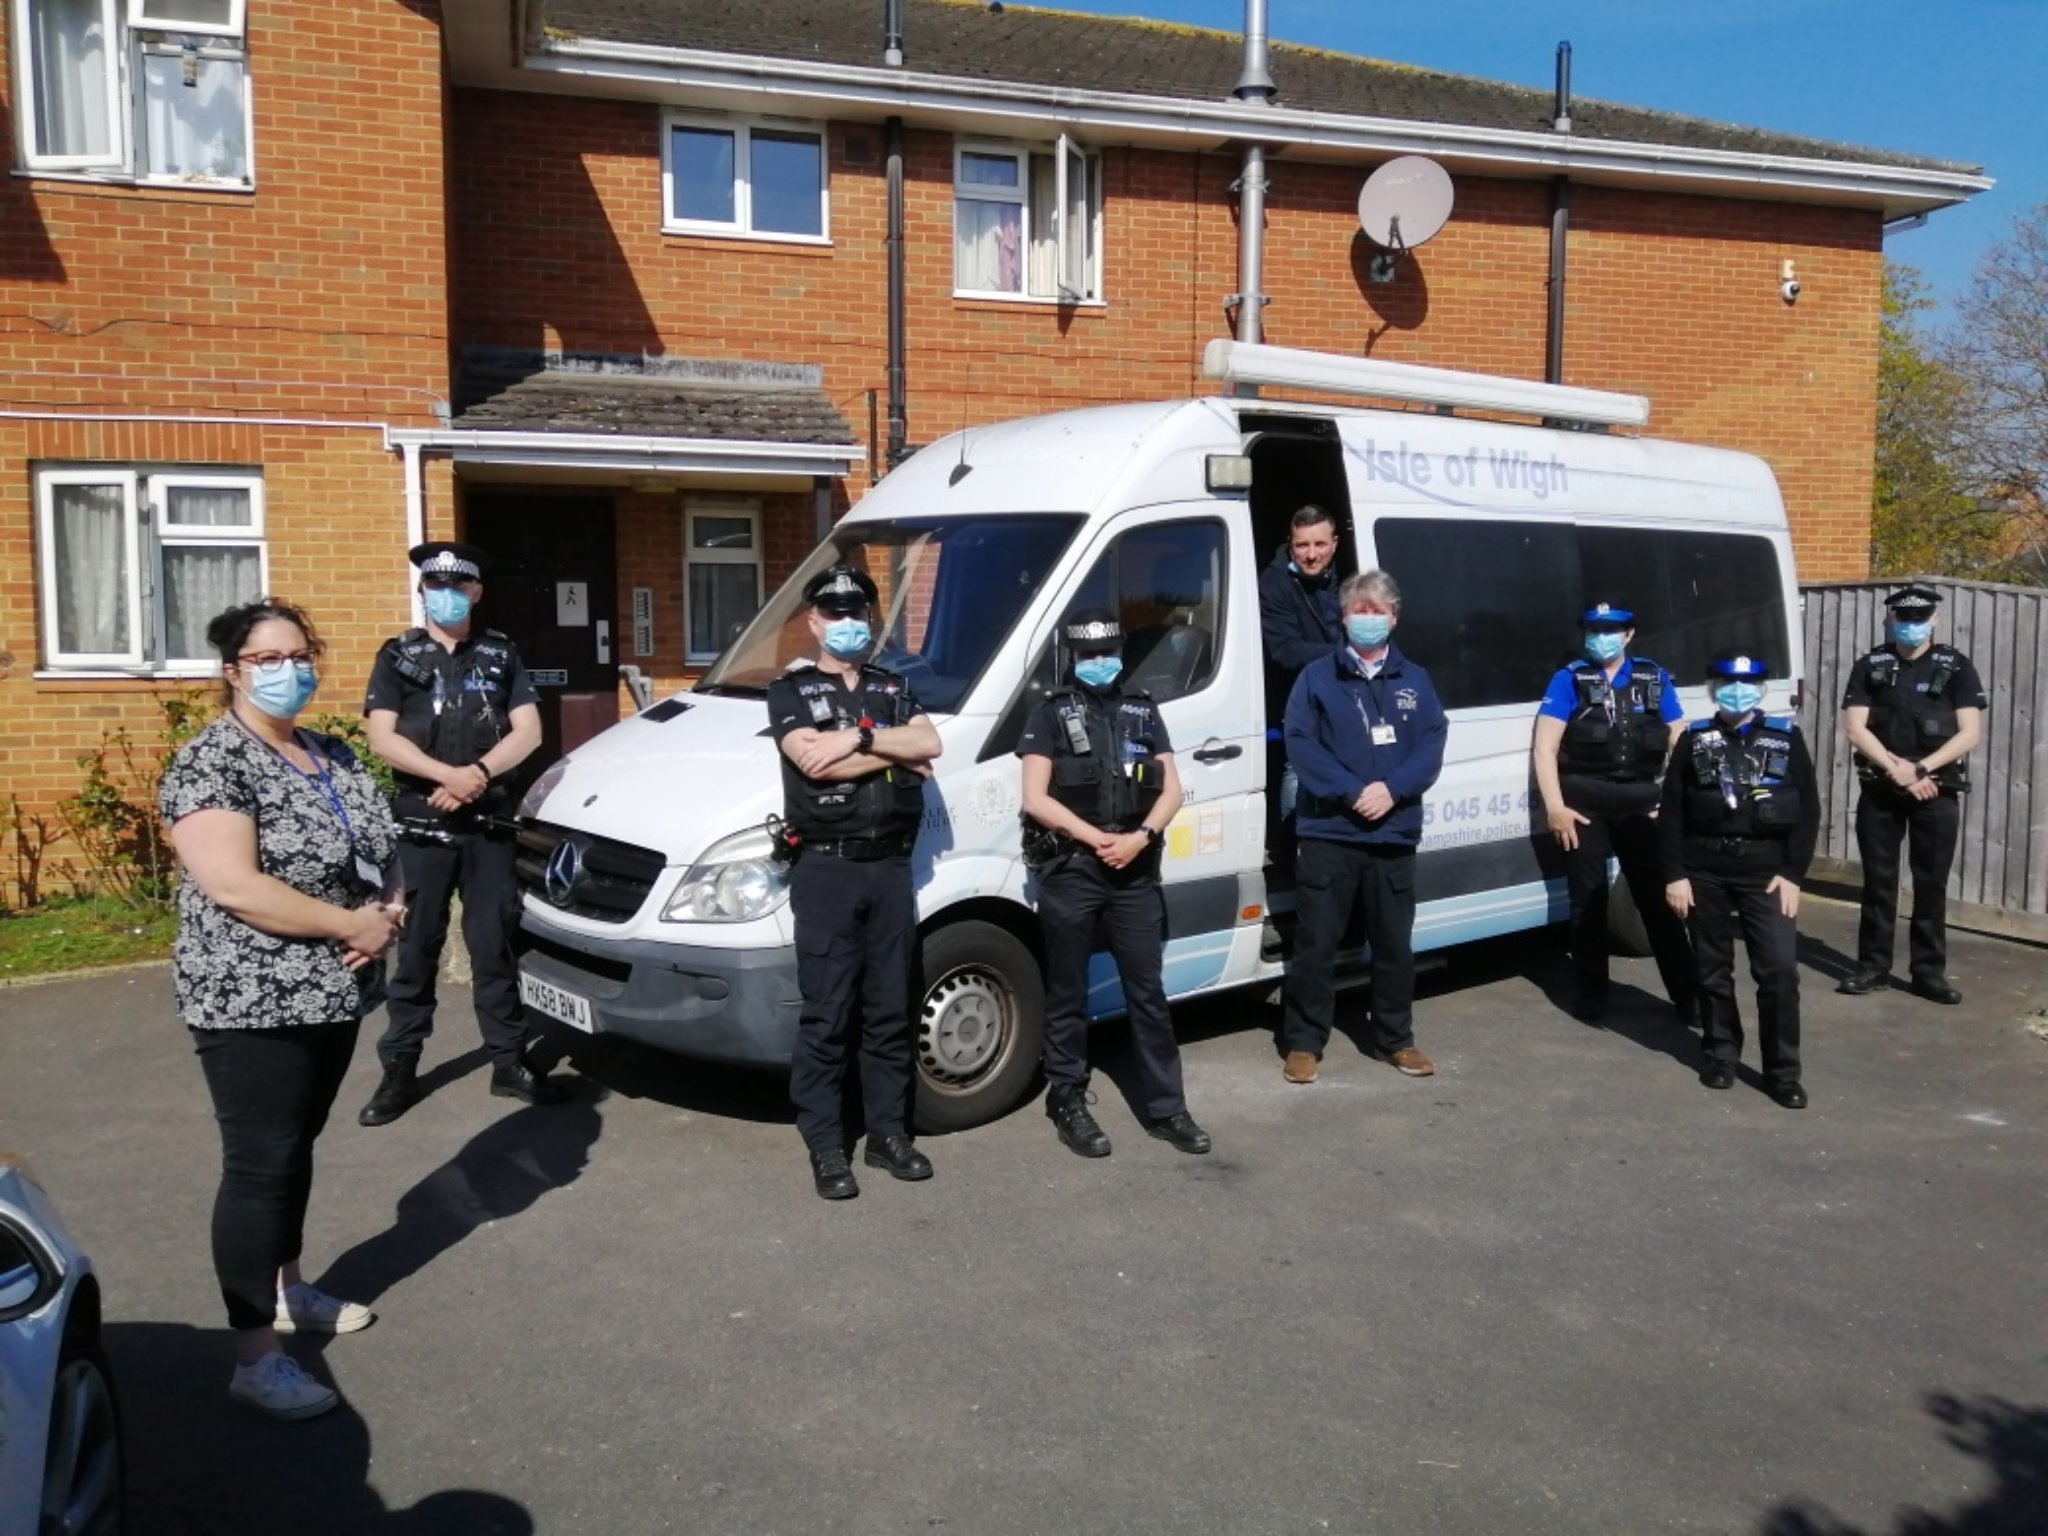 Officers from South Wight Neighbourhoods Policing Team, Mick Halliday of the Isle of Wight Council and Sarah Watkinson of Southern Housing Group. Picture by Isle of Wight Police.